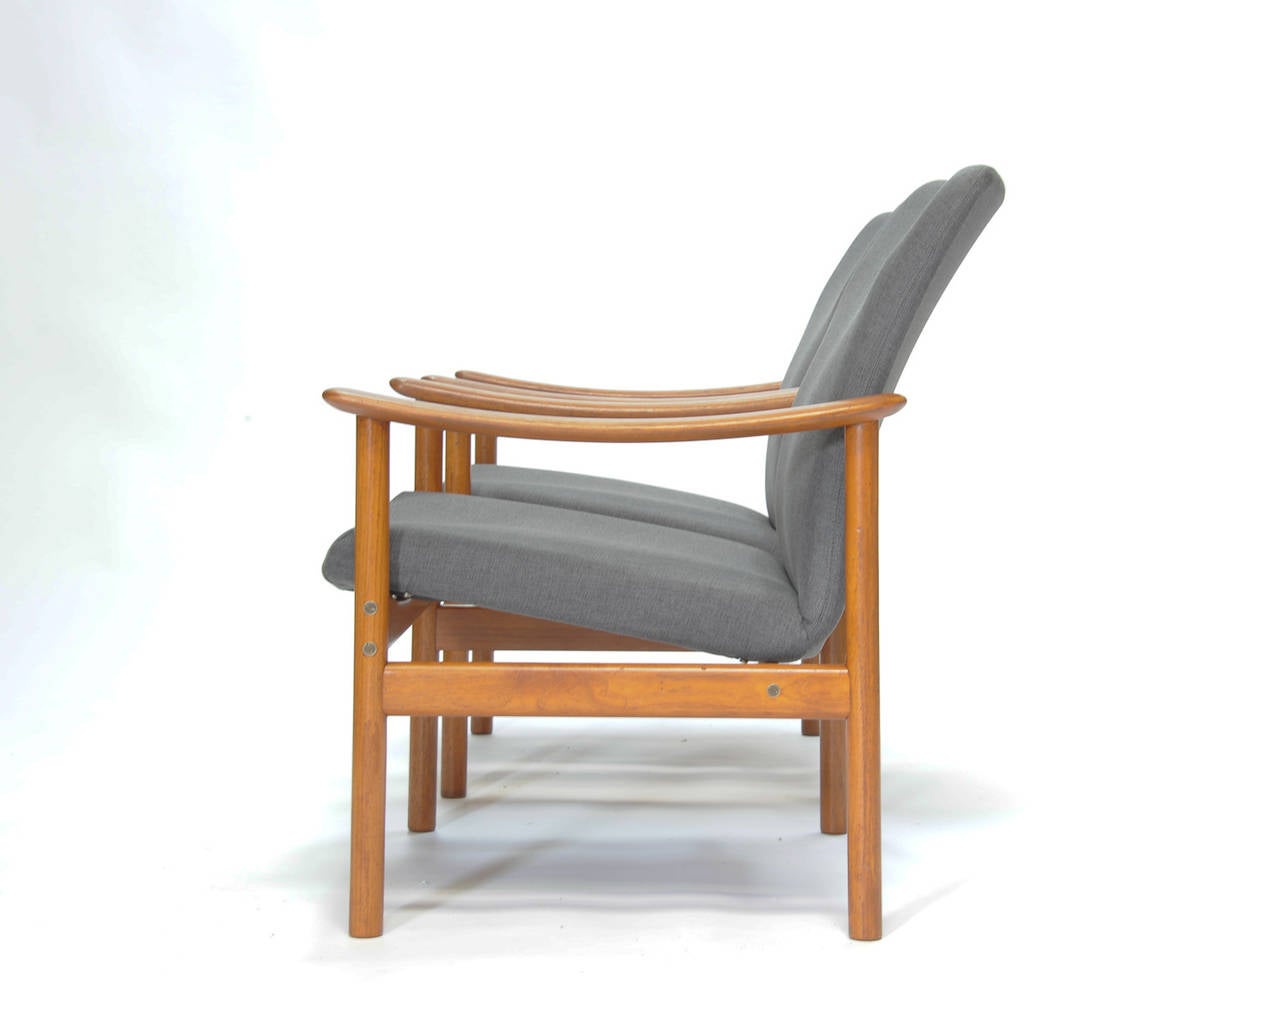 There is two pair of these chairs averrable for purchase. The teak and seat have been completely redone in a neutral gray wool. Dimensions: Arm height is 21.5